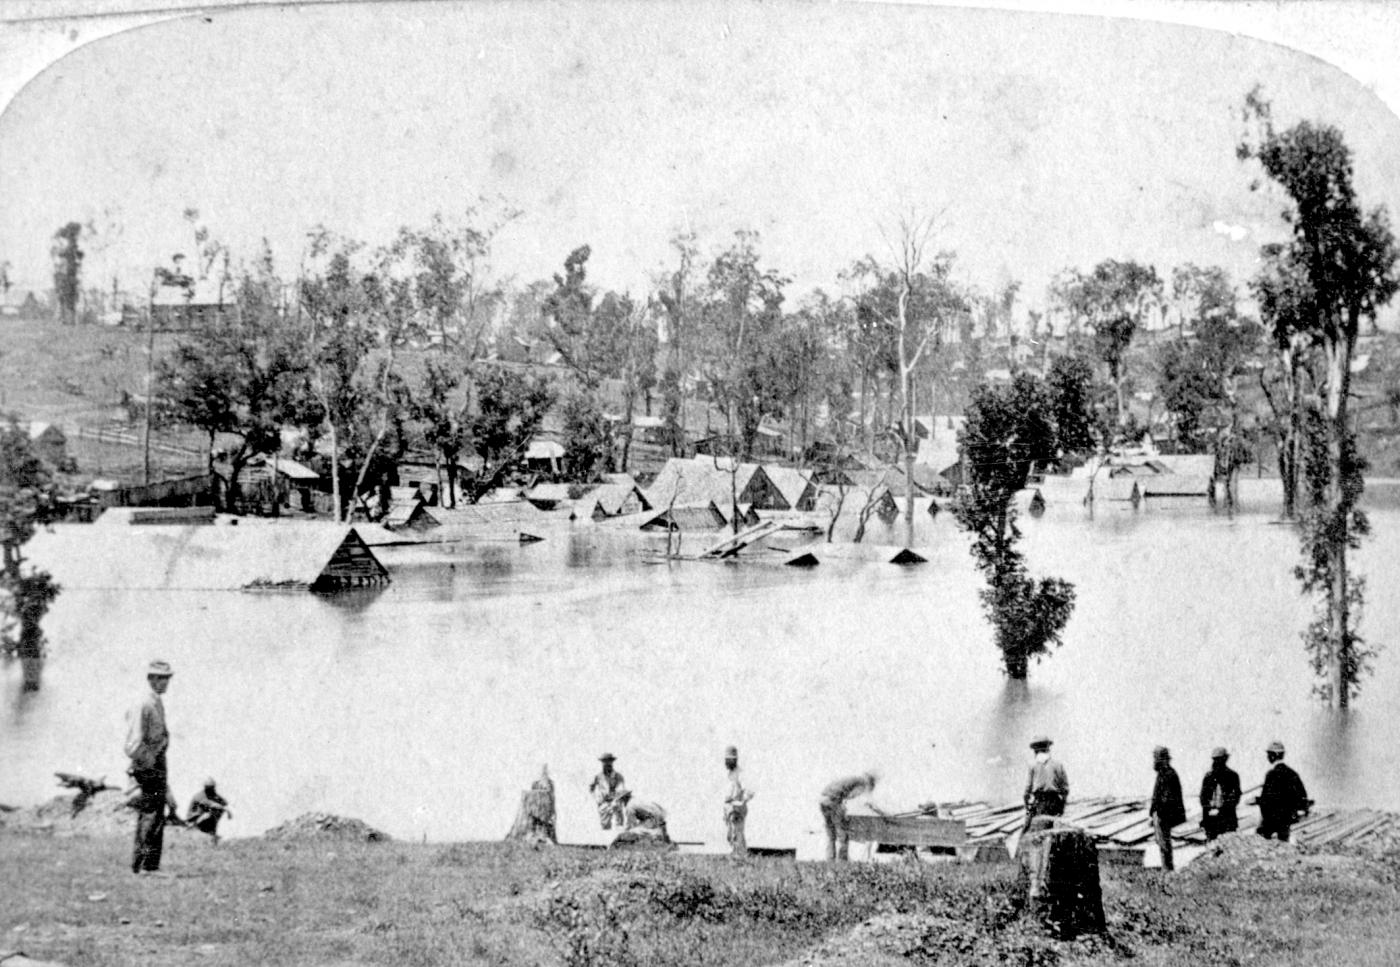 The Gympie Flood, June 19 1873